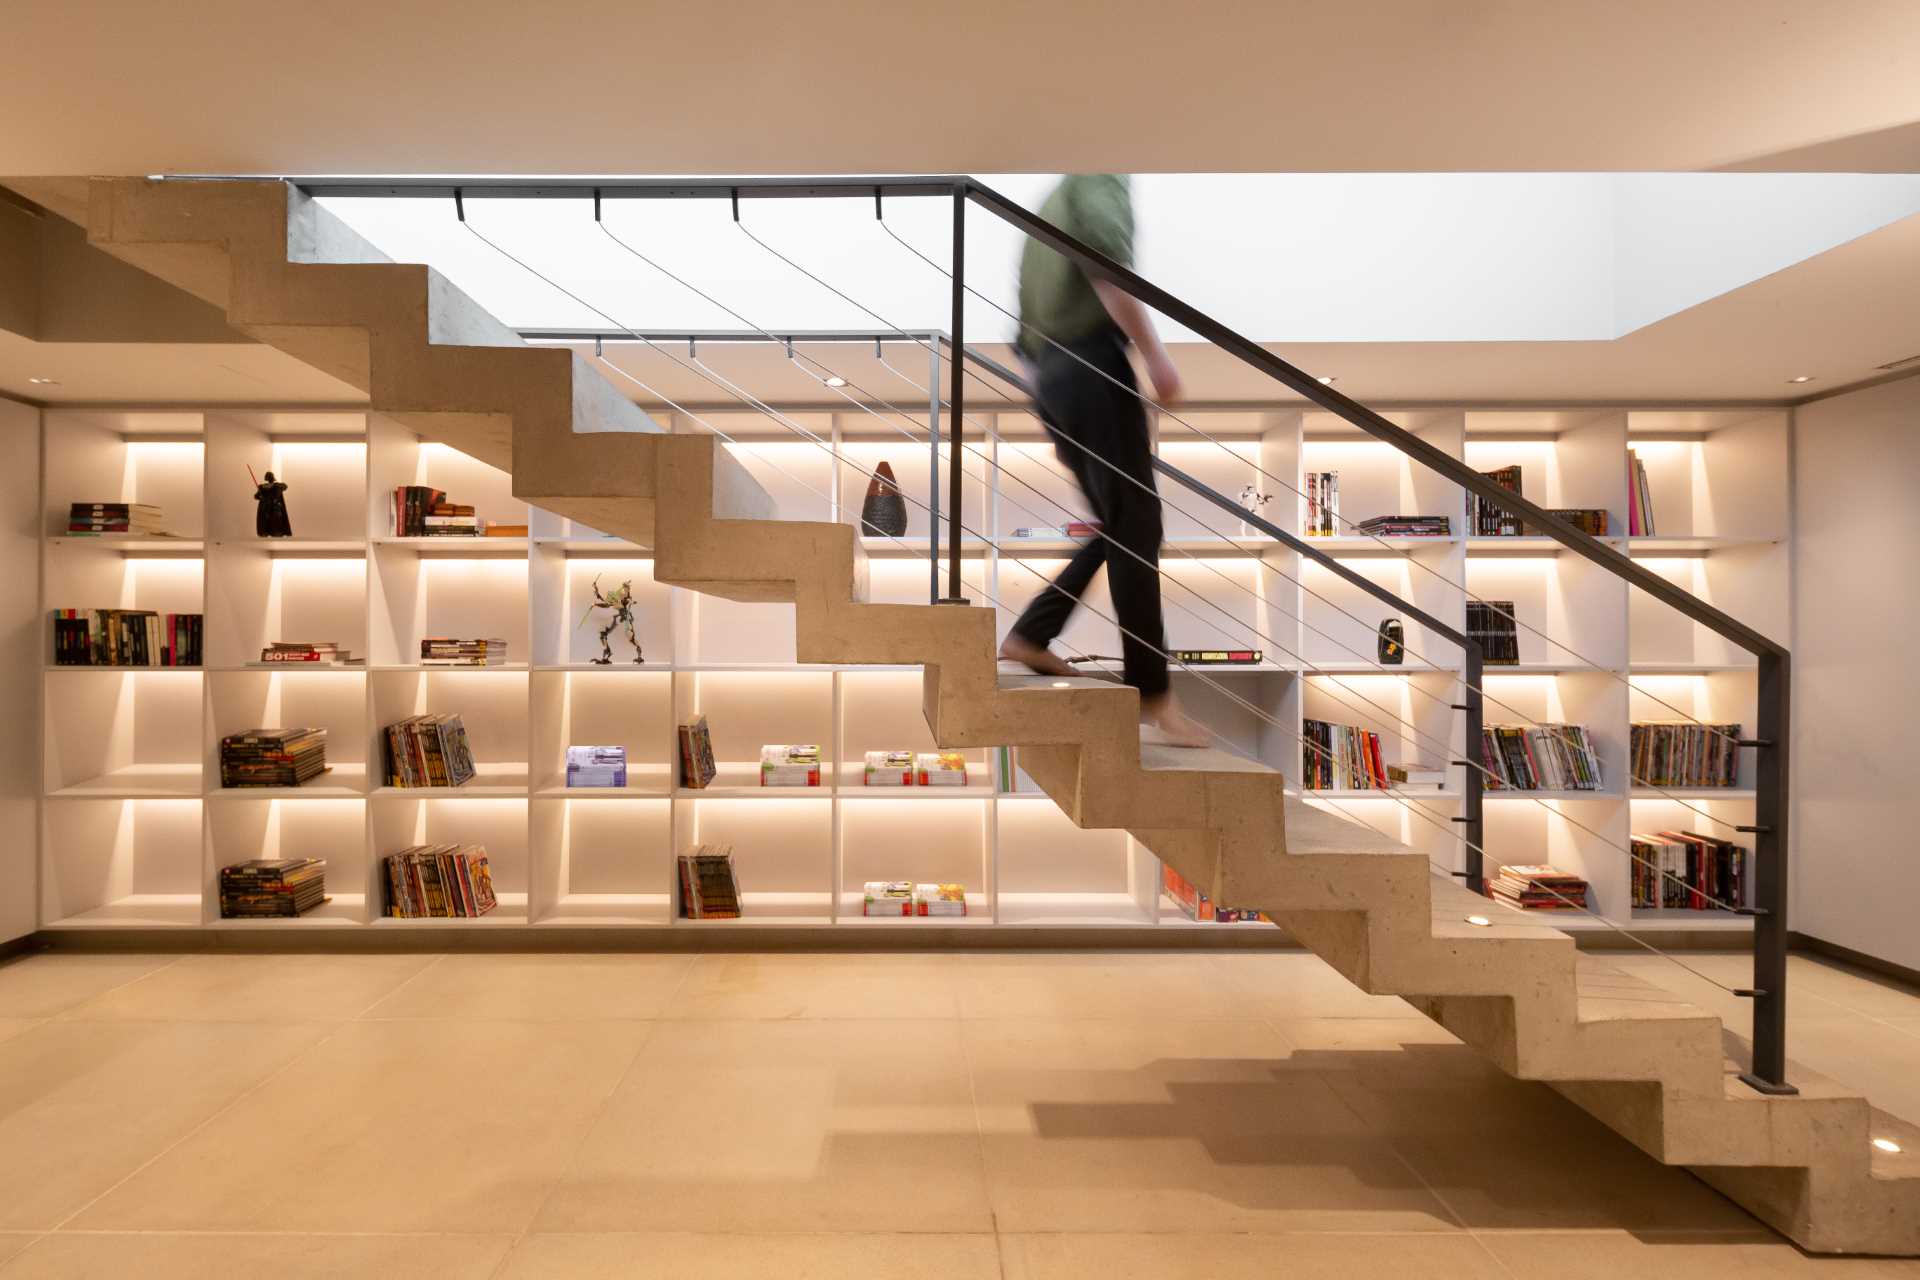 Concrete stairs lead down to a basement that has a wall of shelving with hidden lighting.